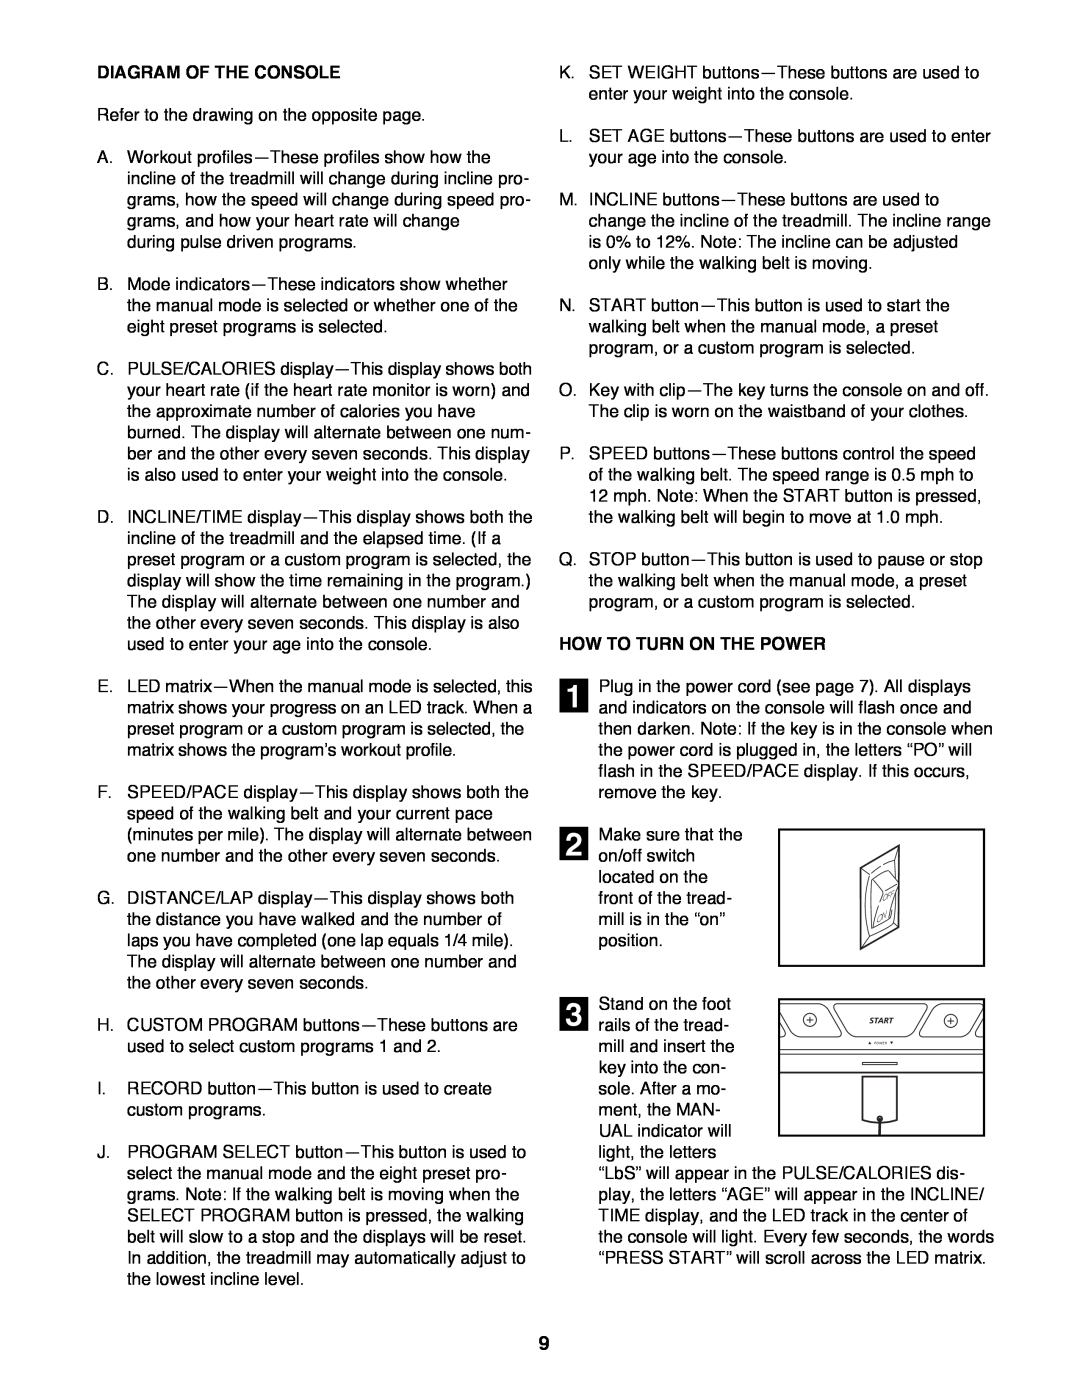 Image 831.297572 user manual How To Turn On The Power, Diagram Of The Console, Refer to the drawing on the opposite page 